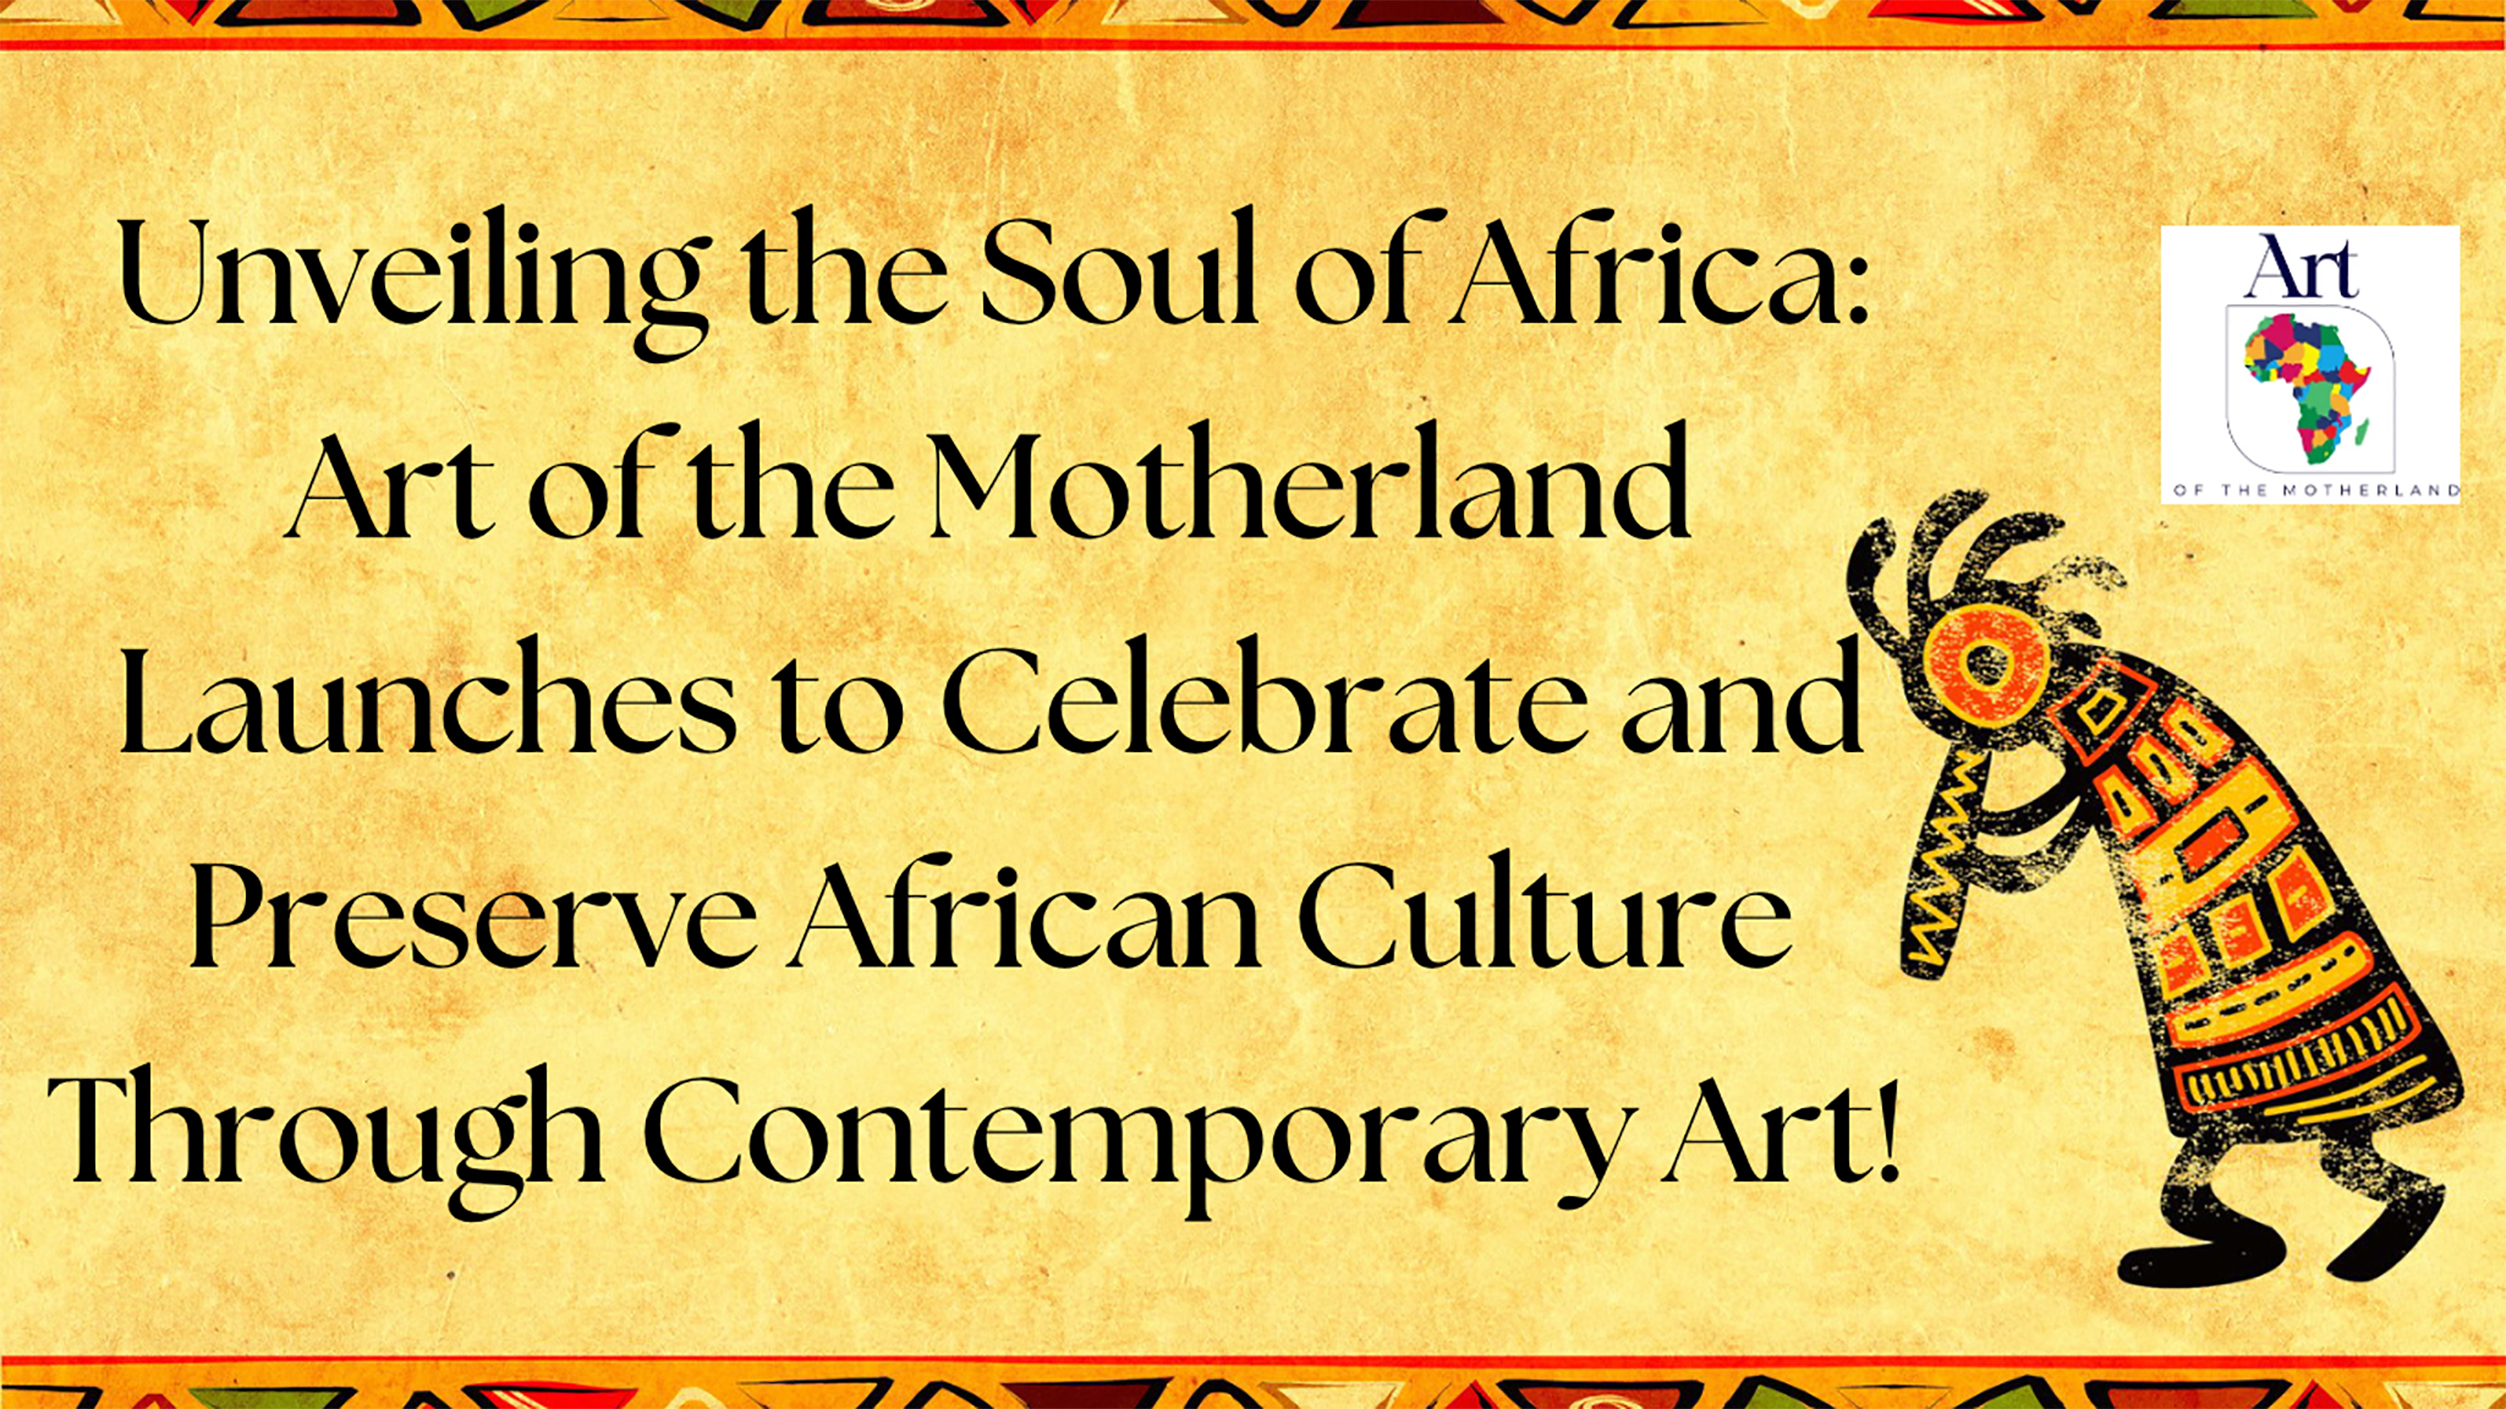 Art of the Motherland Launches to Celebrate and Preserve African Culture